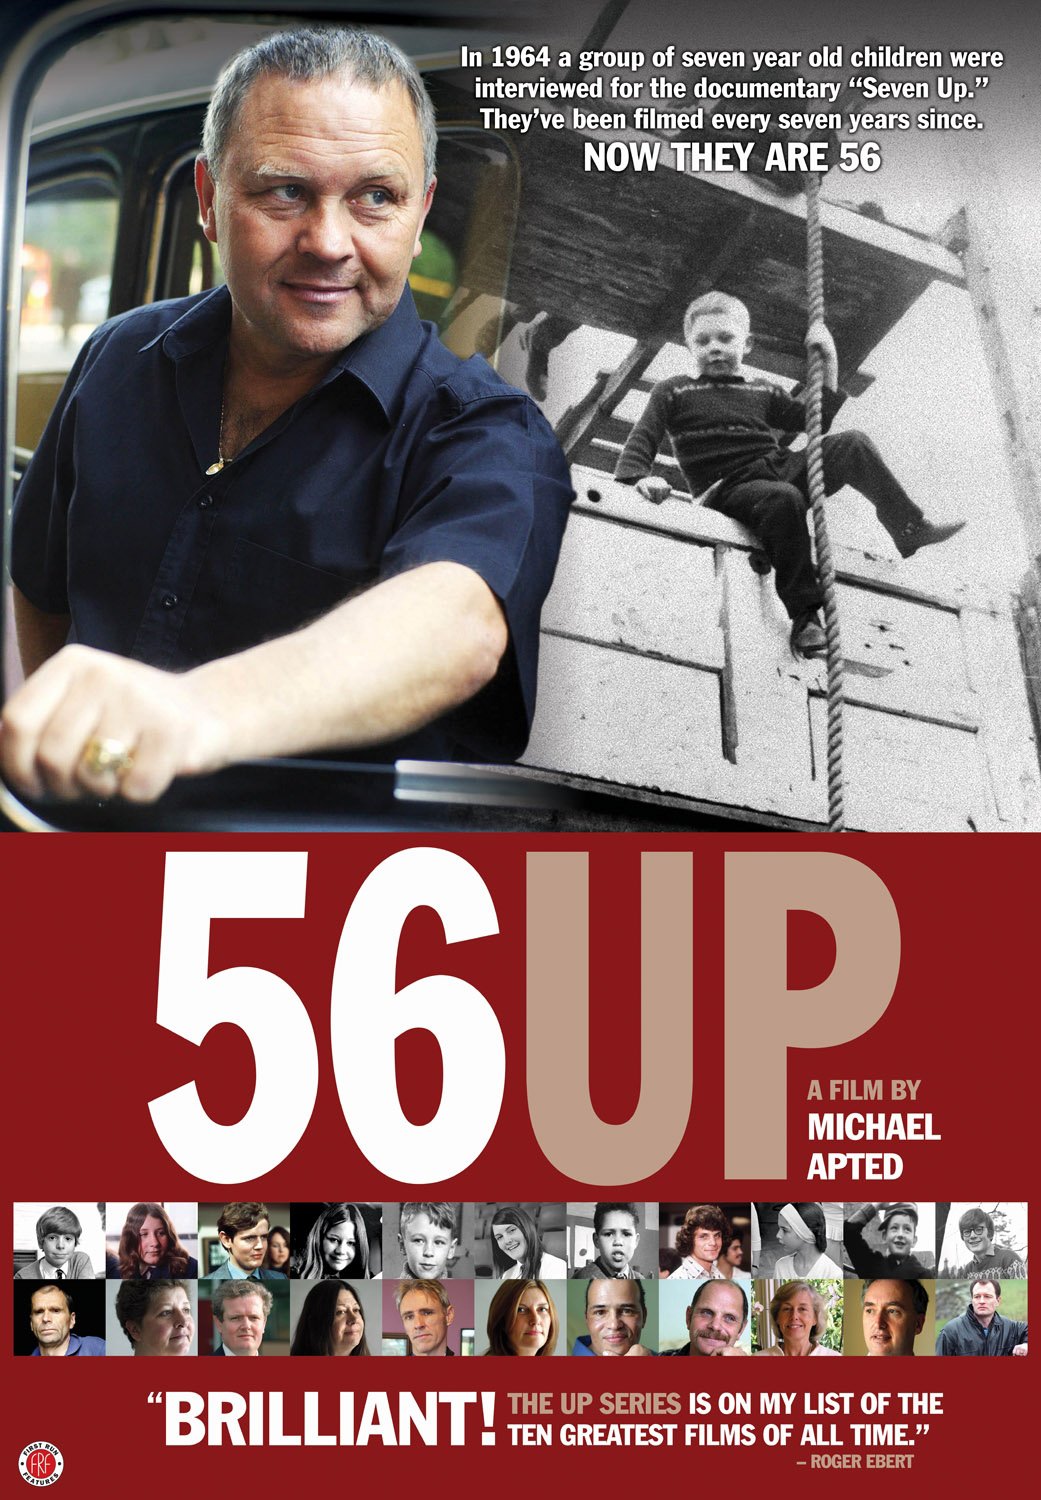 Poster of the movie 56 Up